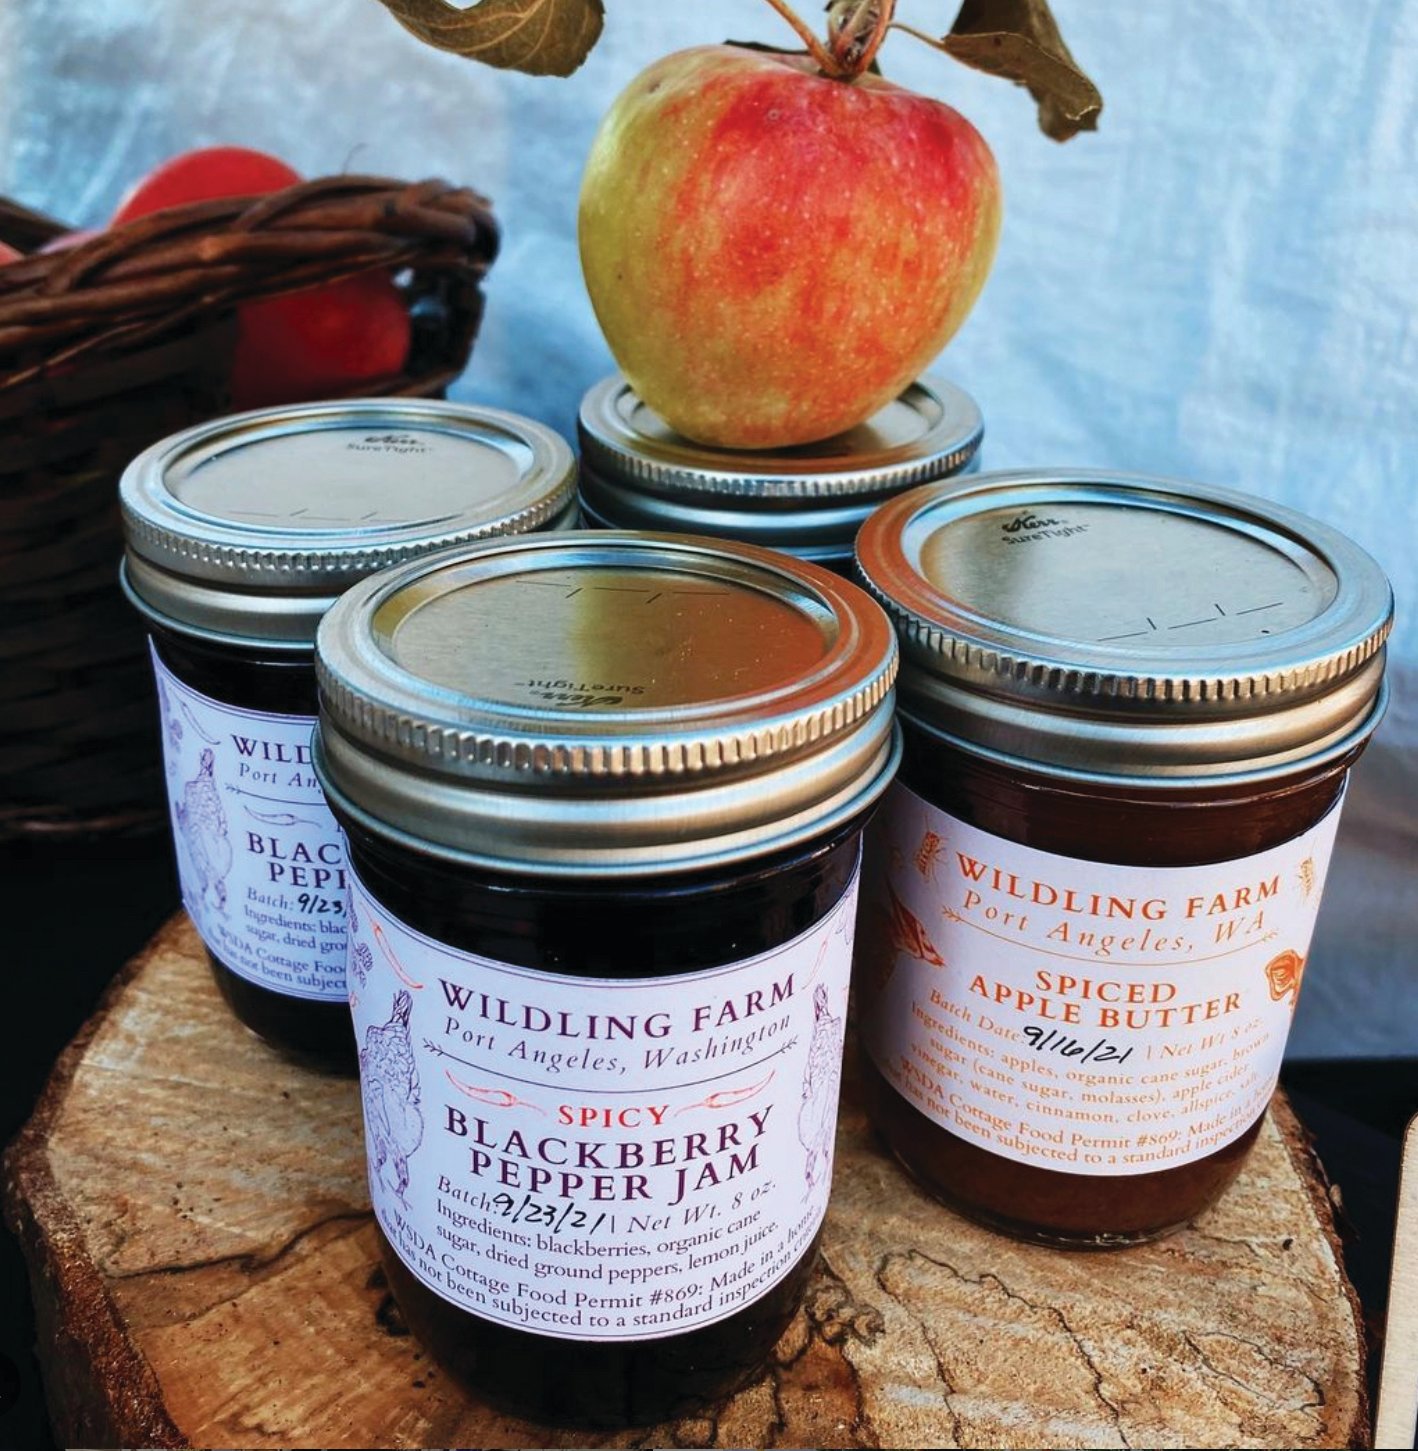 Handmade preserves are just one of many of the products Wildling Farm offers, from eggs to rosemary salt, hand-painted notecards and sourdough tortillas. Photo courtesy Wildling Farm